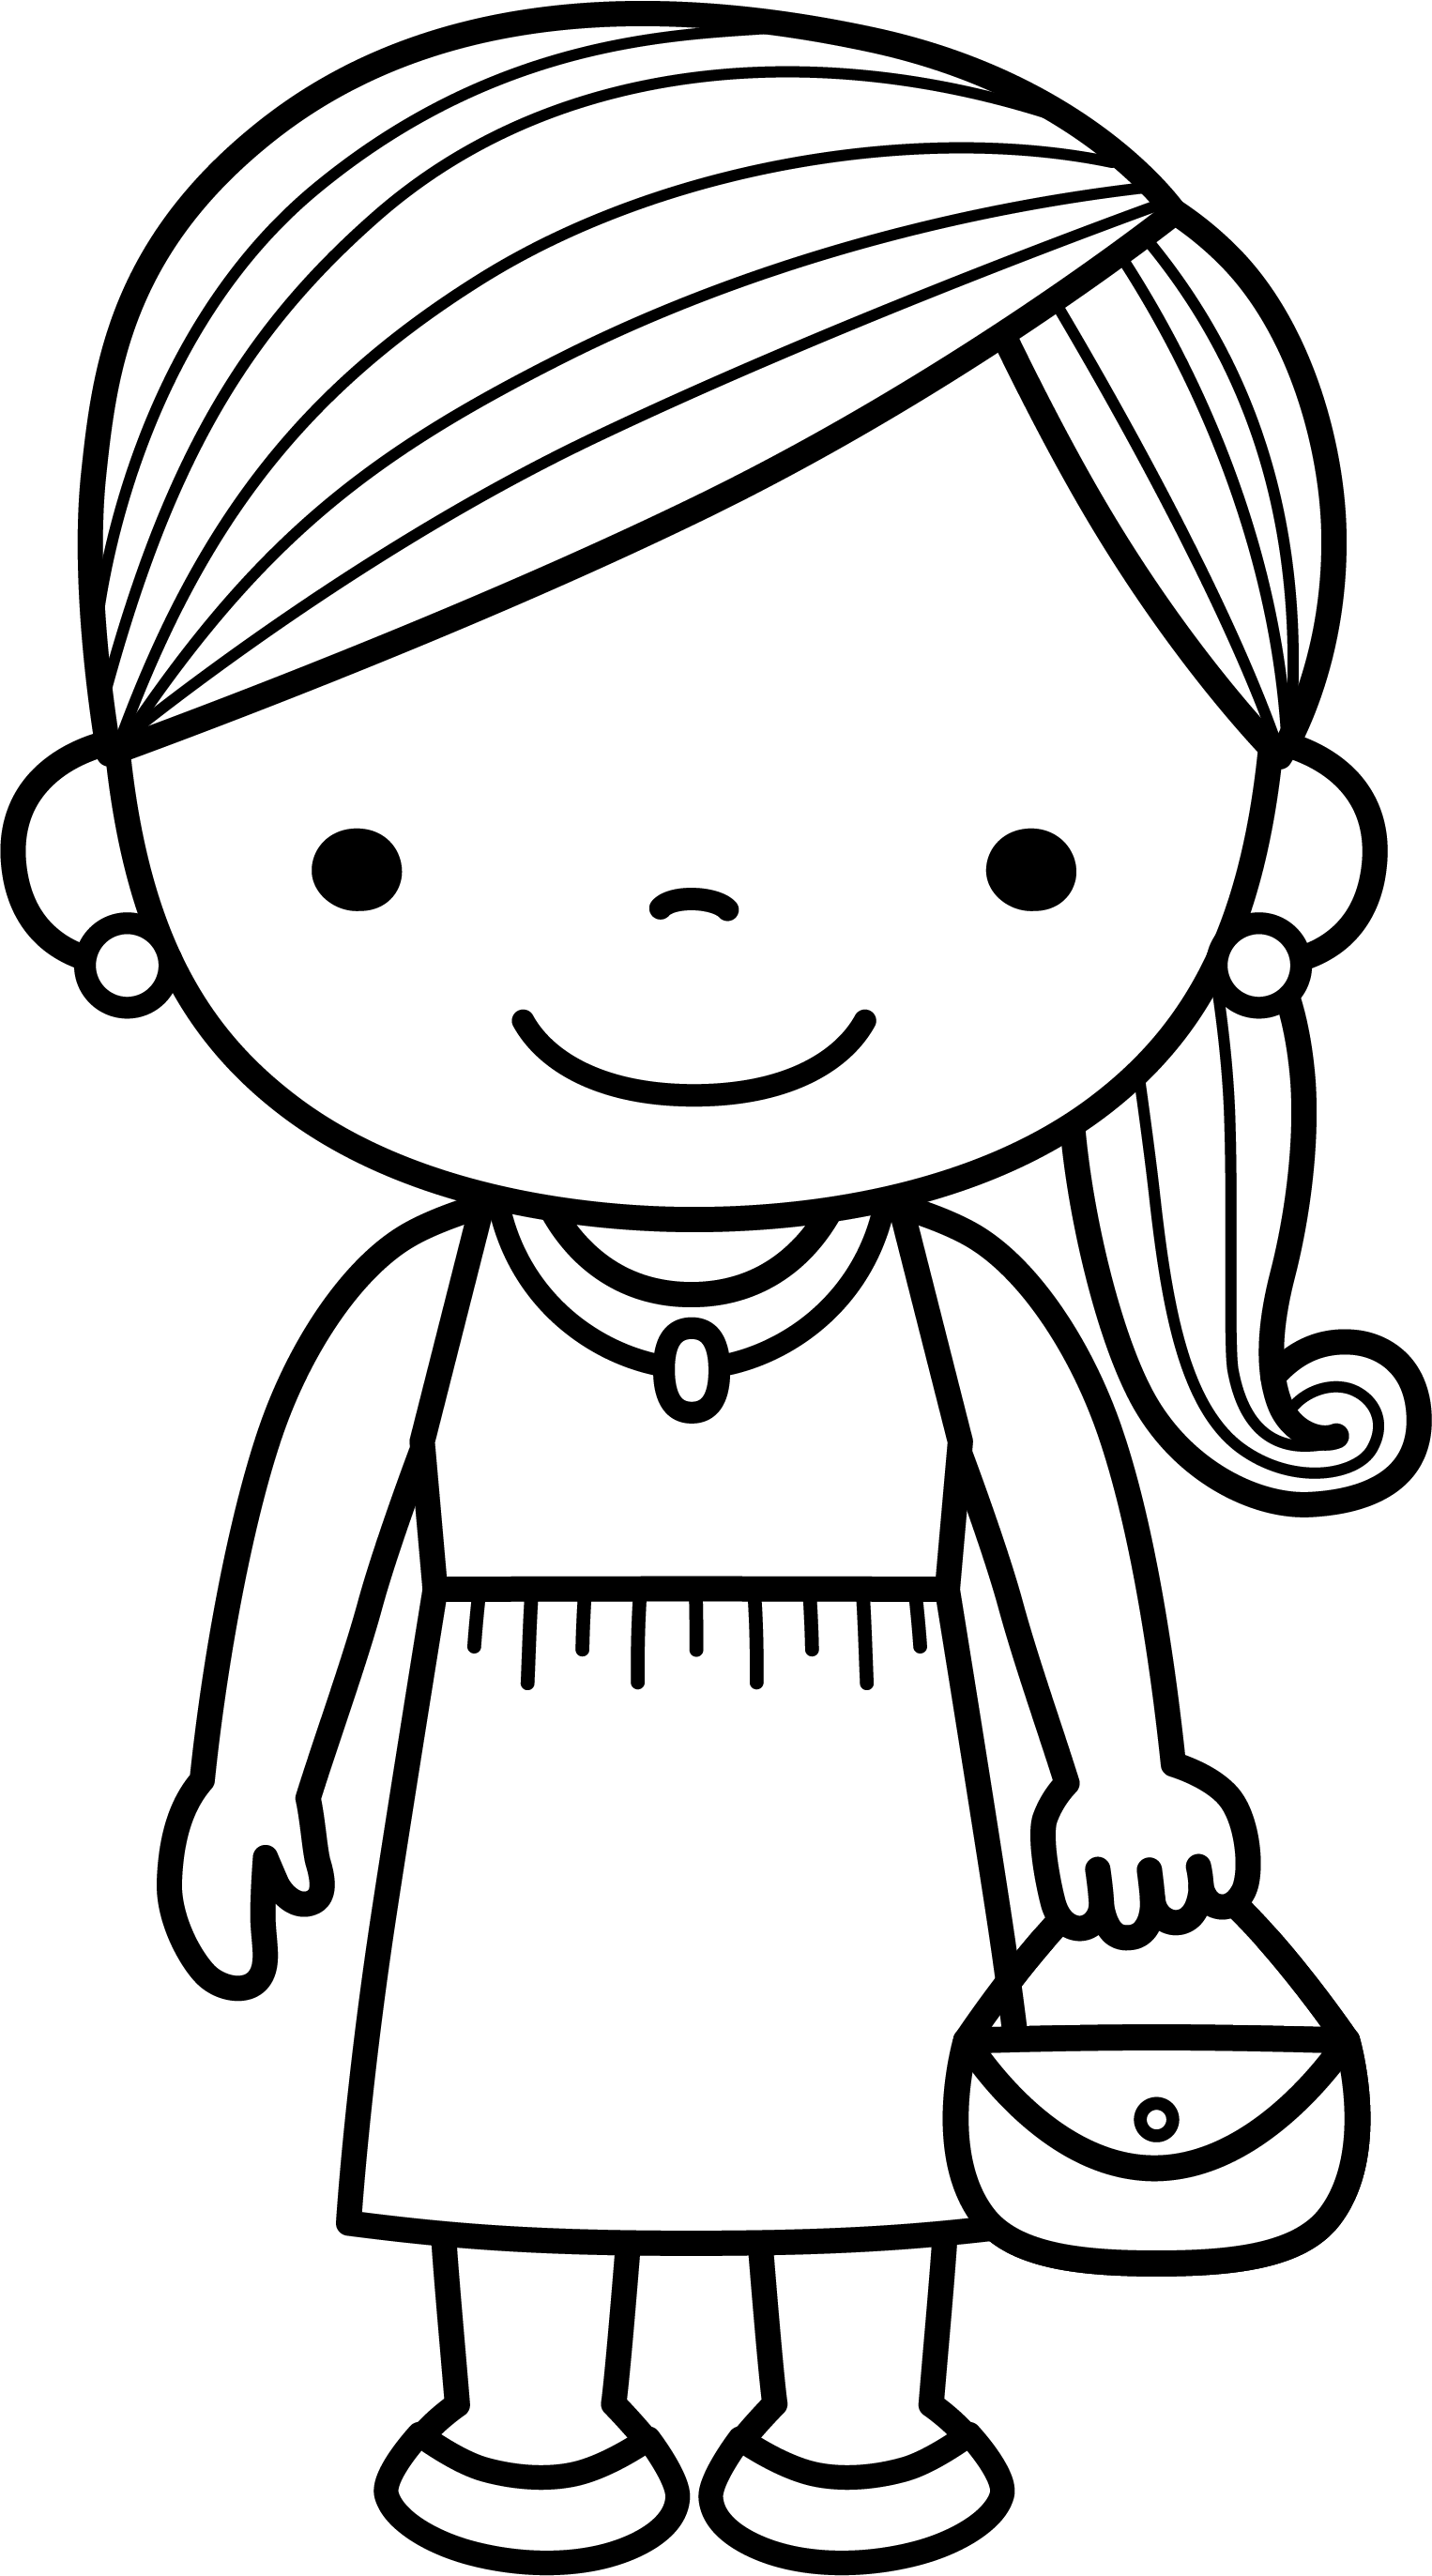 Coloring Pages For Girls, Coloring Book Pages, Coloring Sheets, Easy